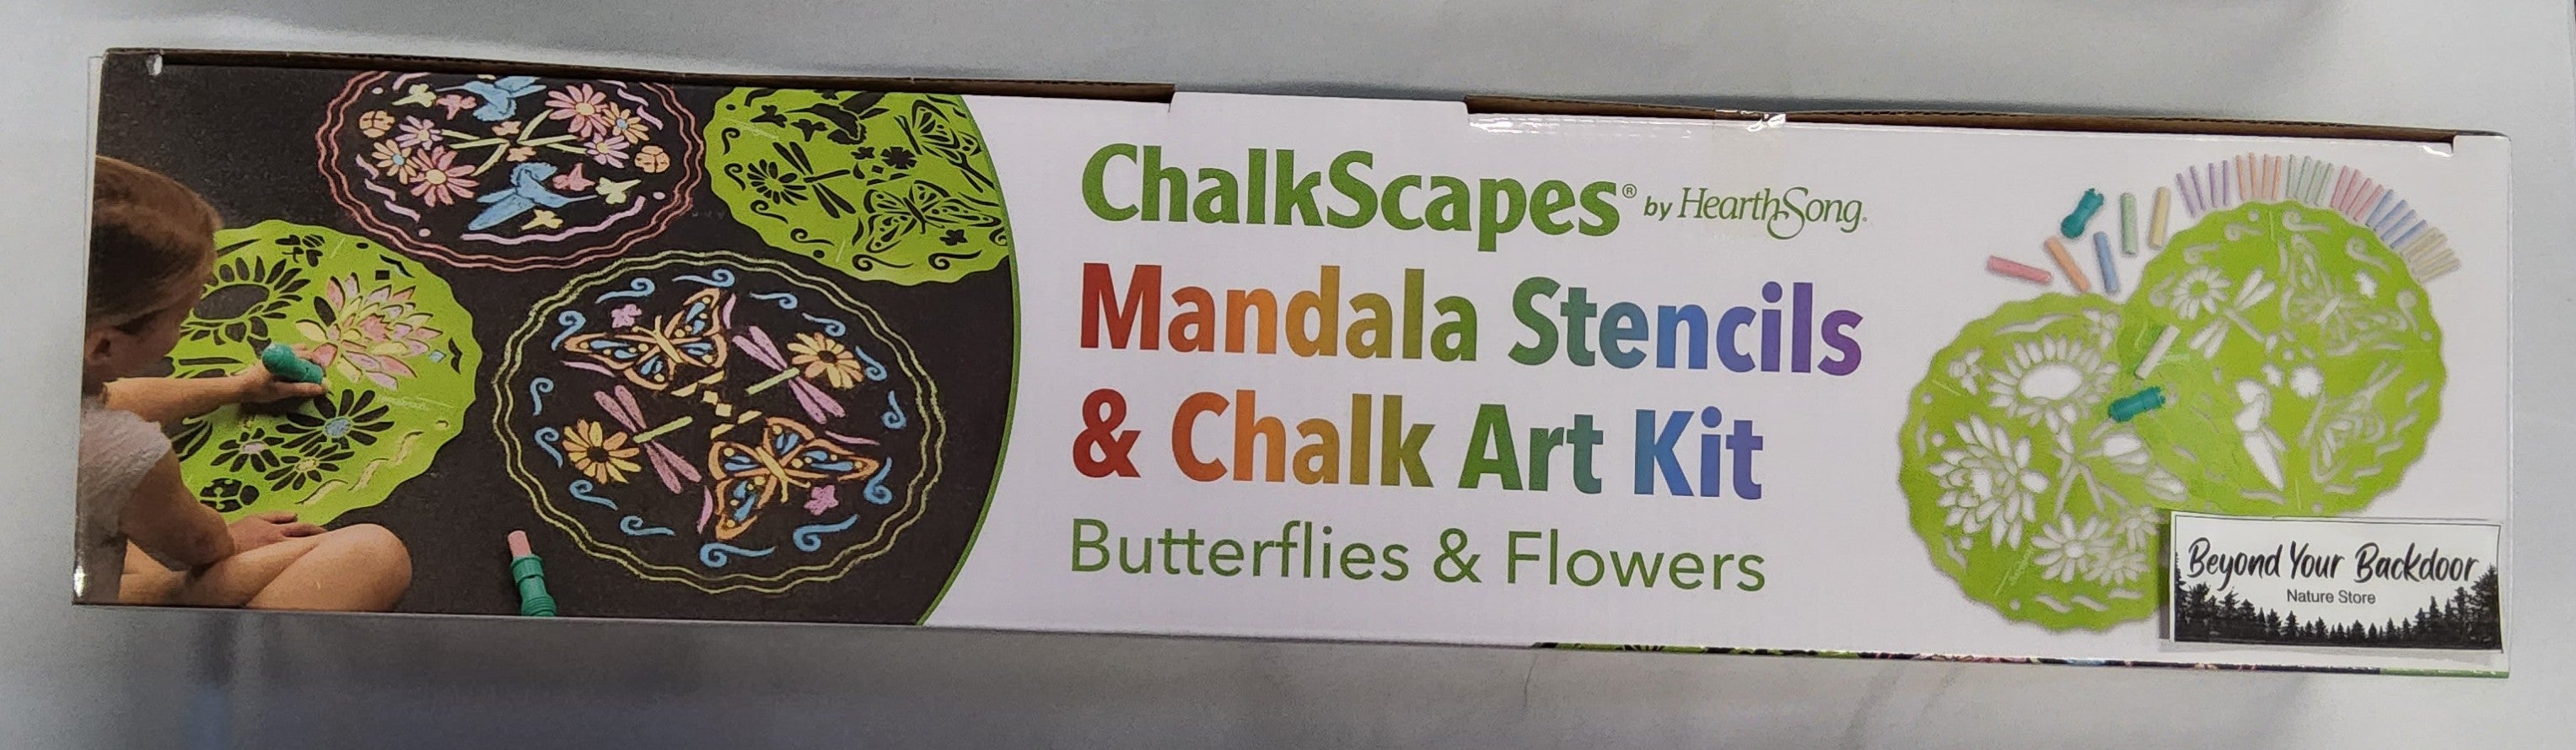 ChalkScapes Mandala Stencils and Chalk Art Kit - Butterflies and Flowers - By HearthSong - 730809BFY